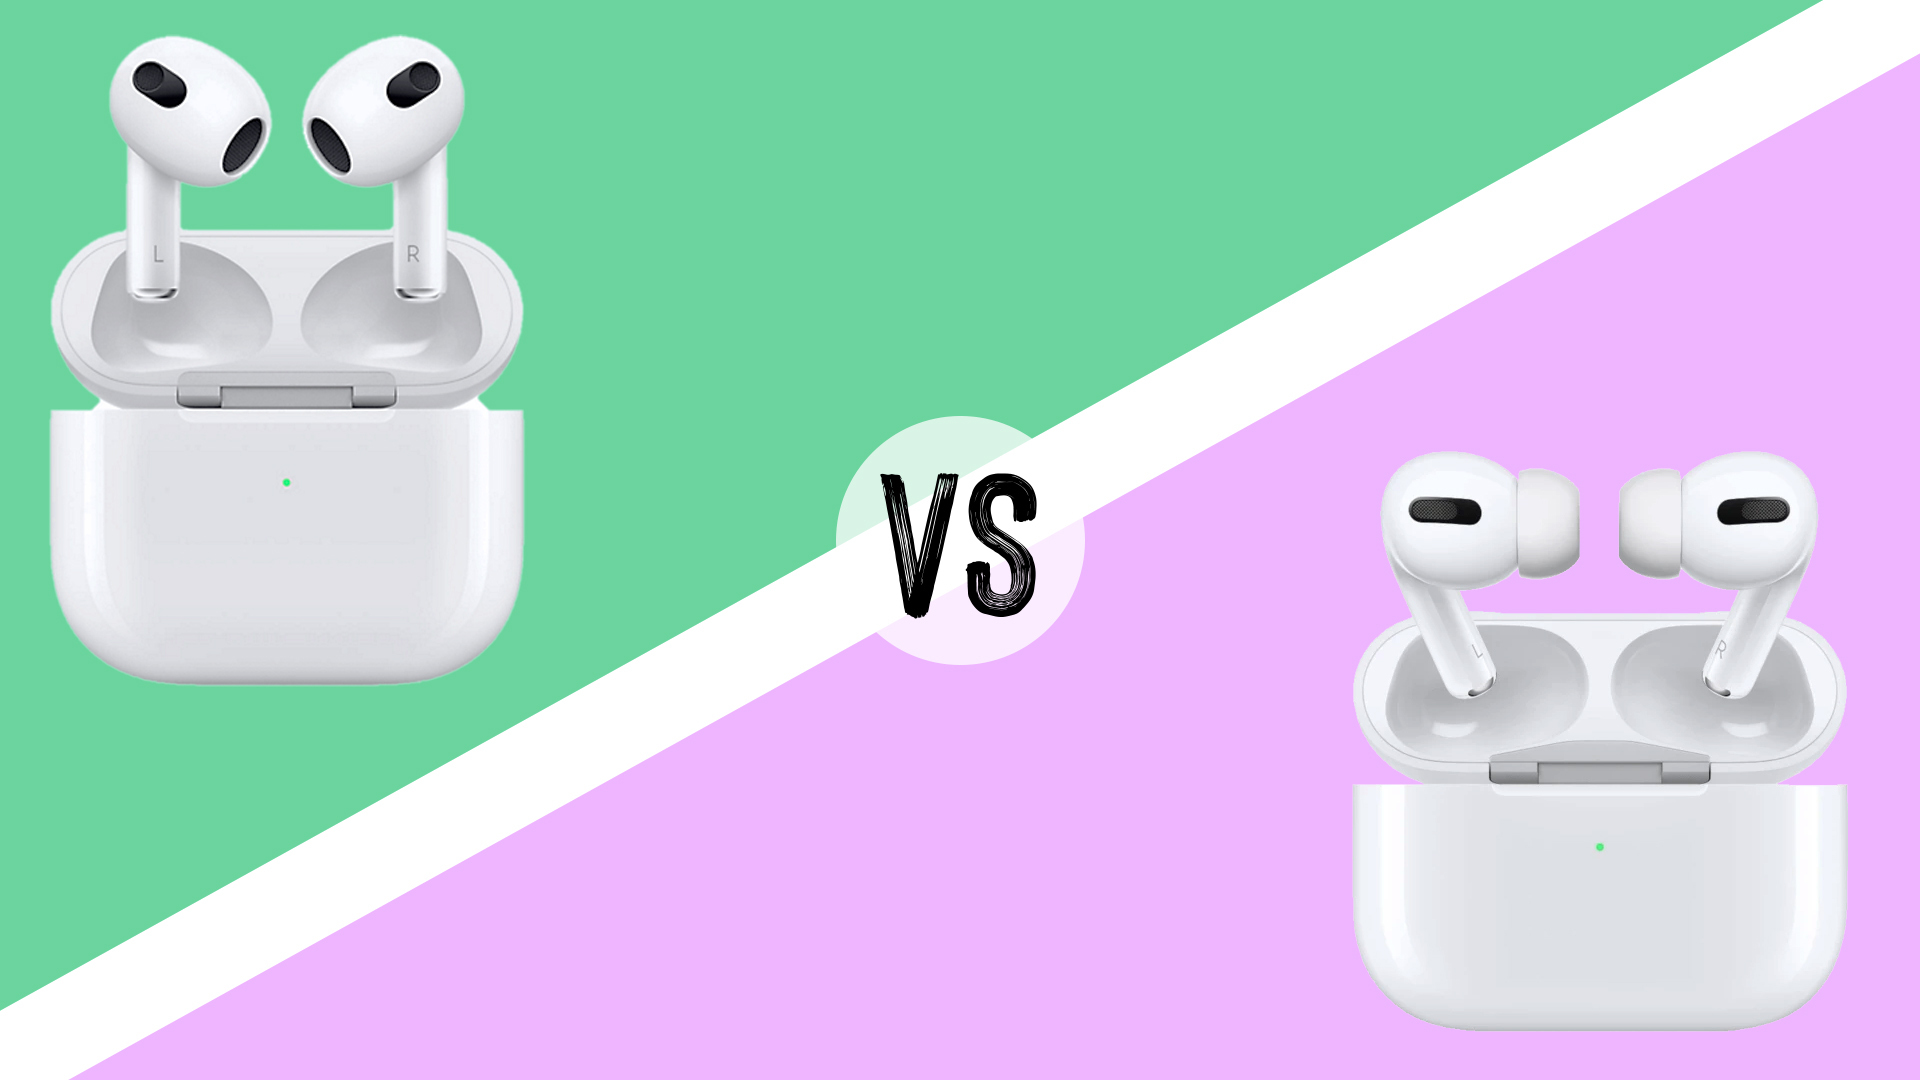 Apple AirPods Pro 3 rumors: Everything we know so far